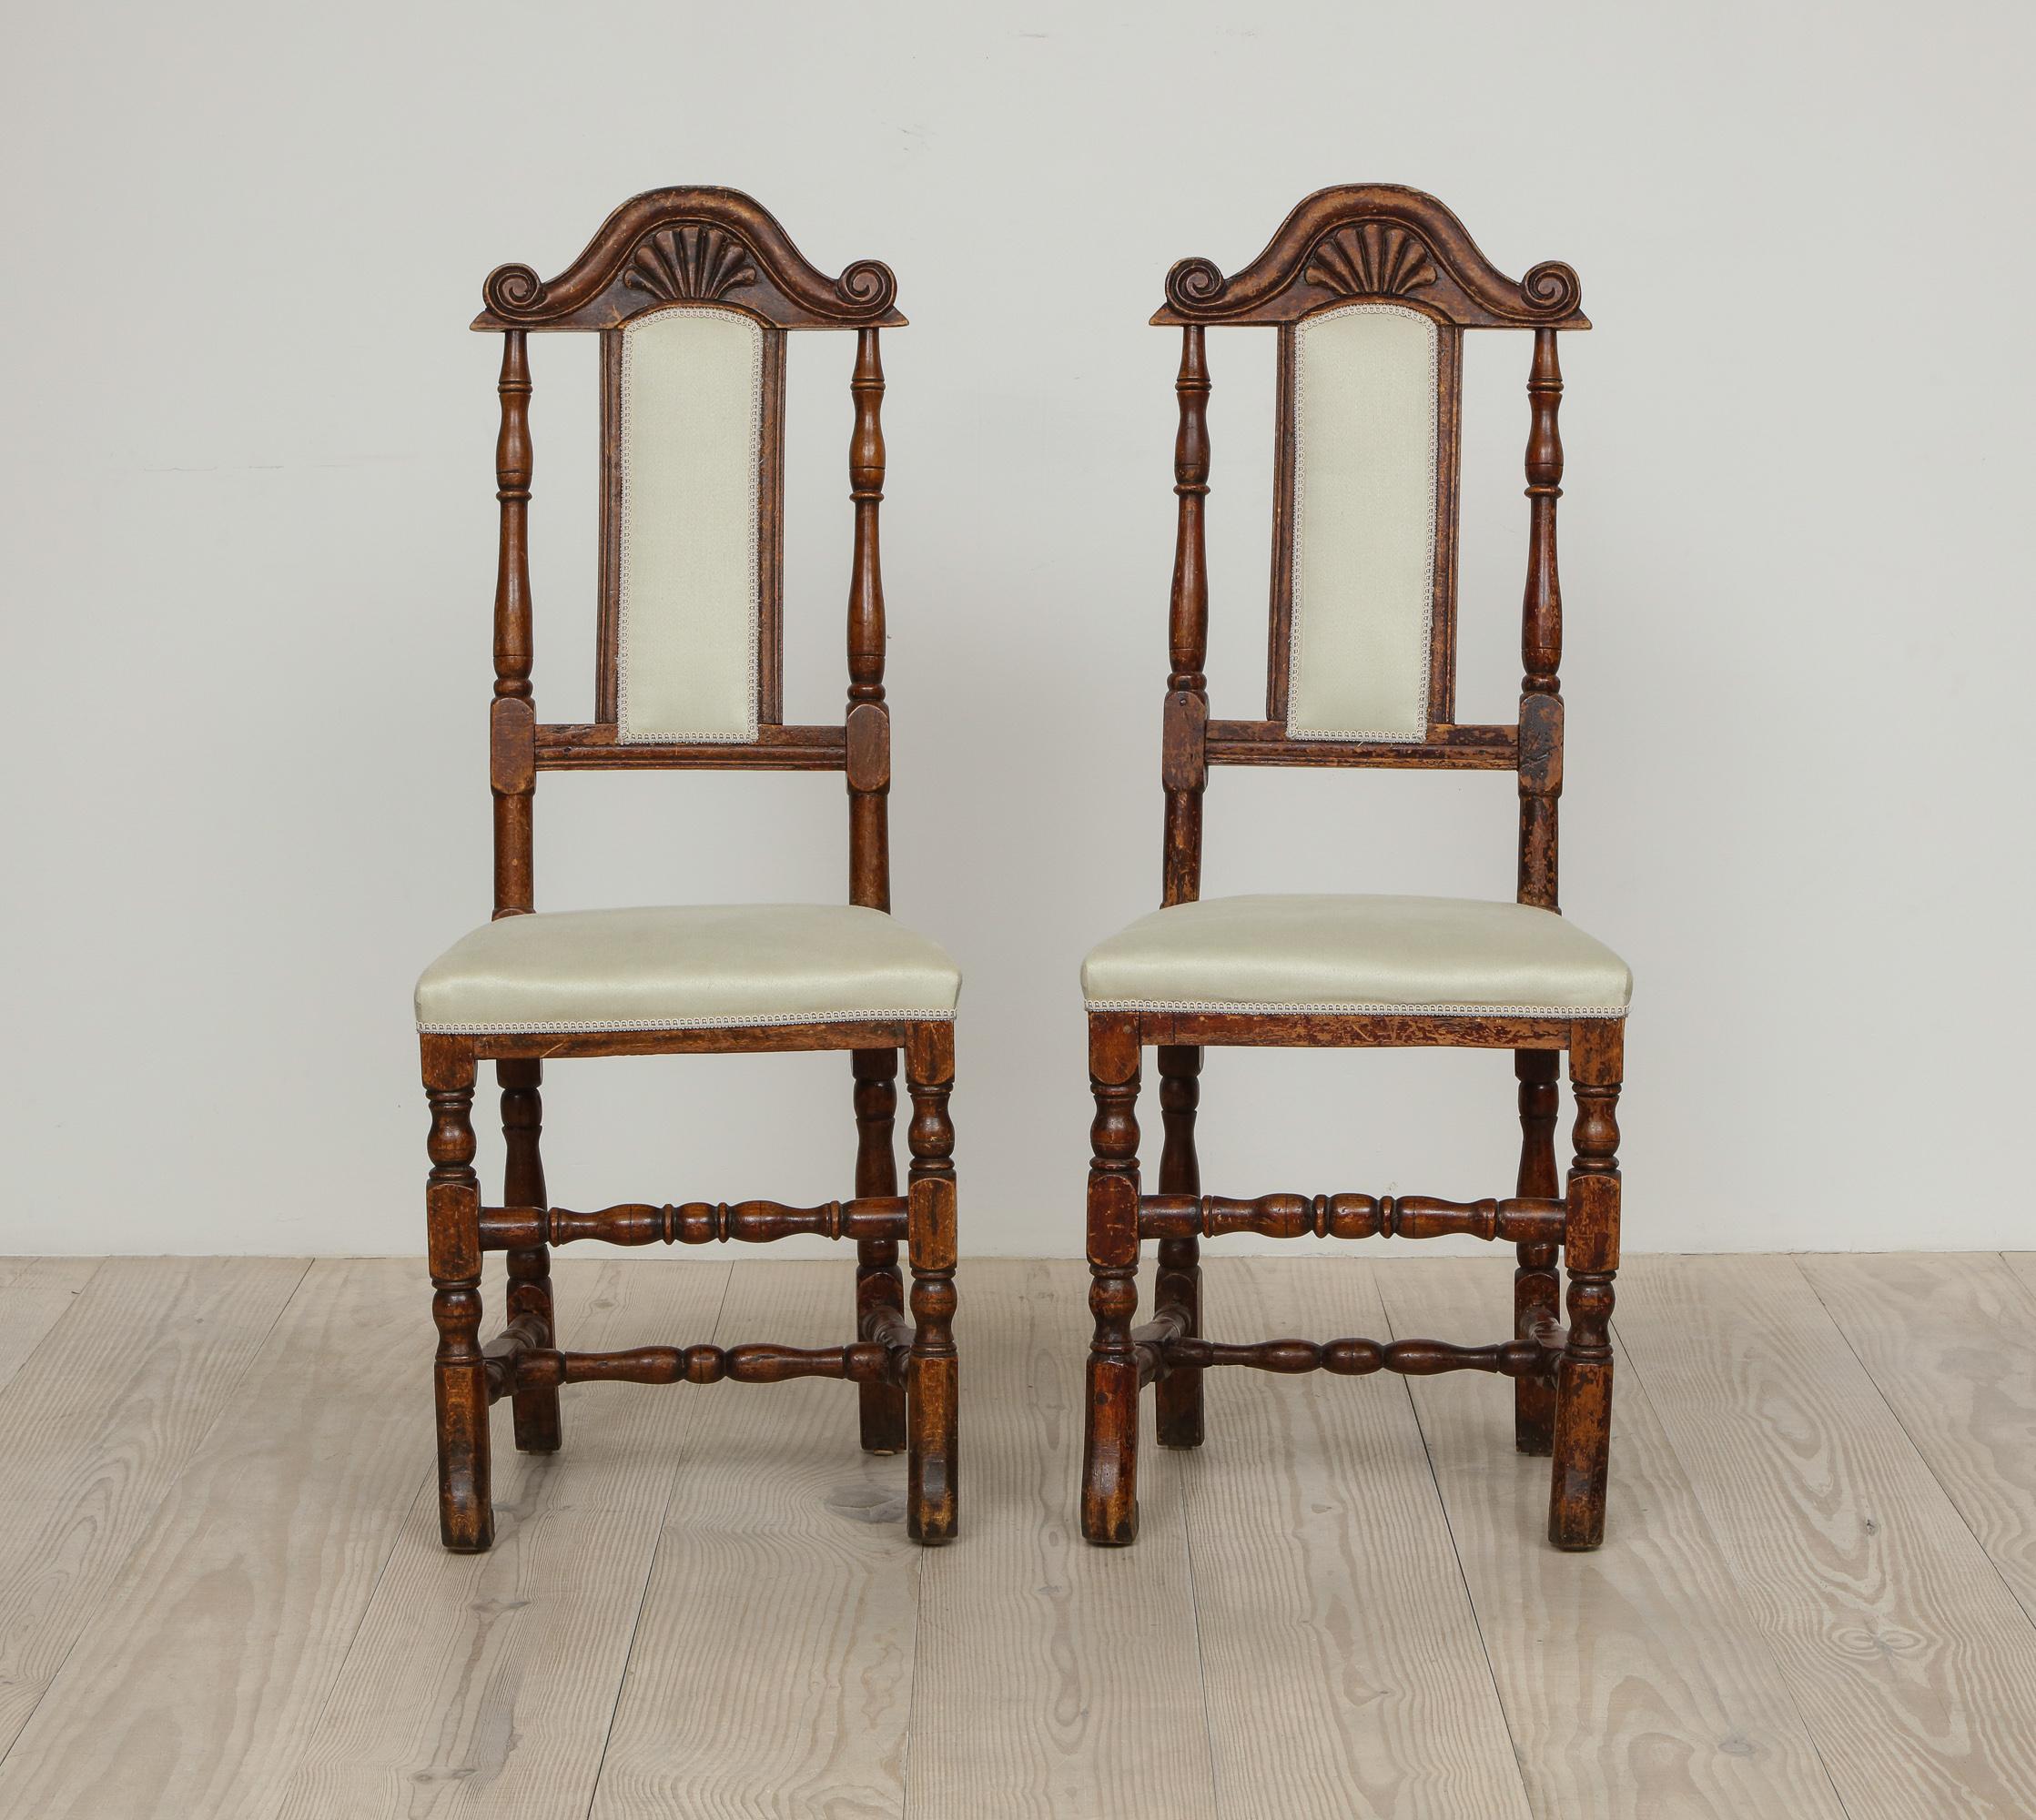 A pair of late Baroque Swedish chairs, origin: Sweden, circa 1750 -1760, reupholstered in linen sateen fabric from Rogers & Goffigon, the wood stained to resemble walnut. 

The form of these chairs, including their narrow back splat surmounted by